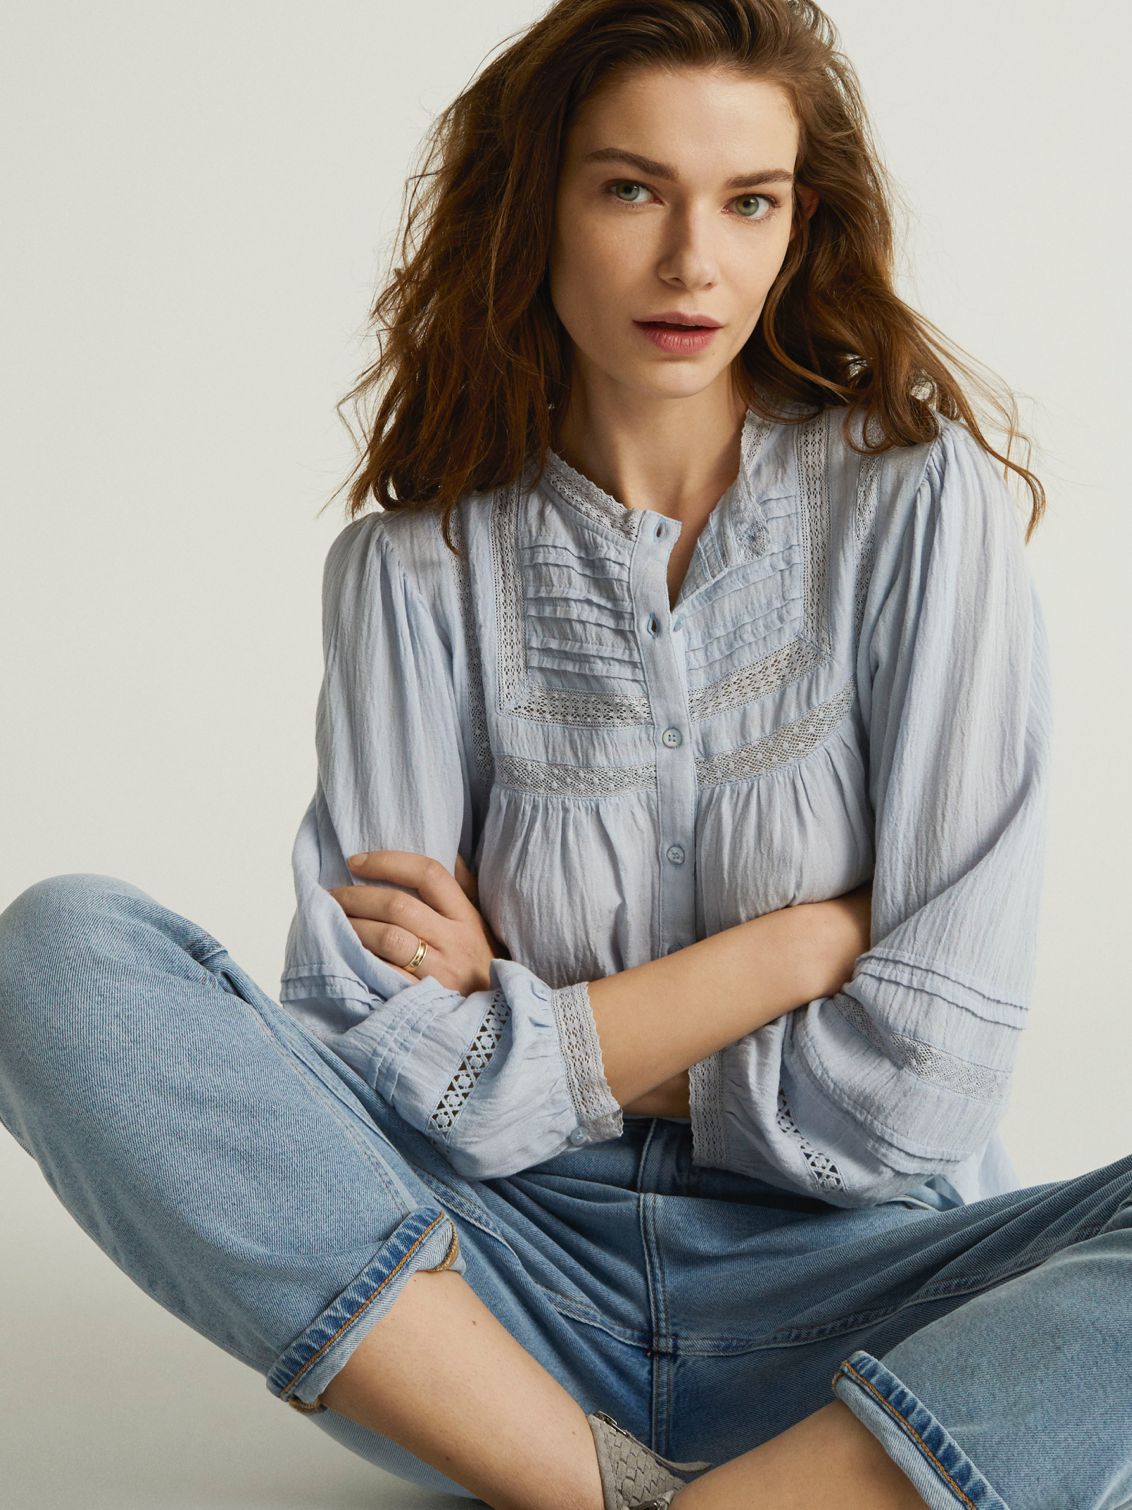 Woman sitting in And/or jeans and top